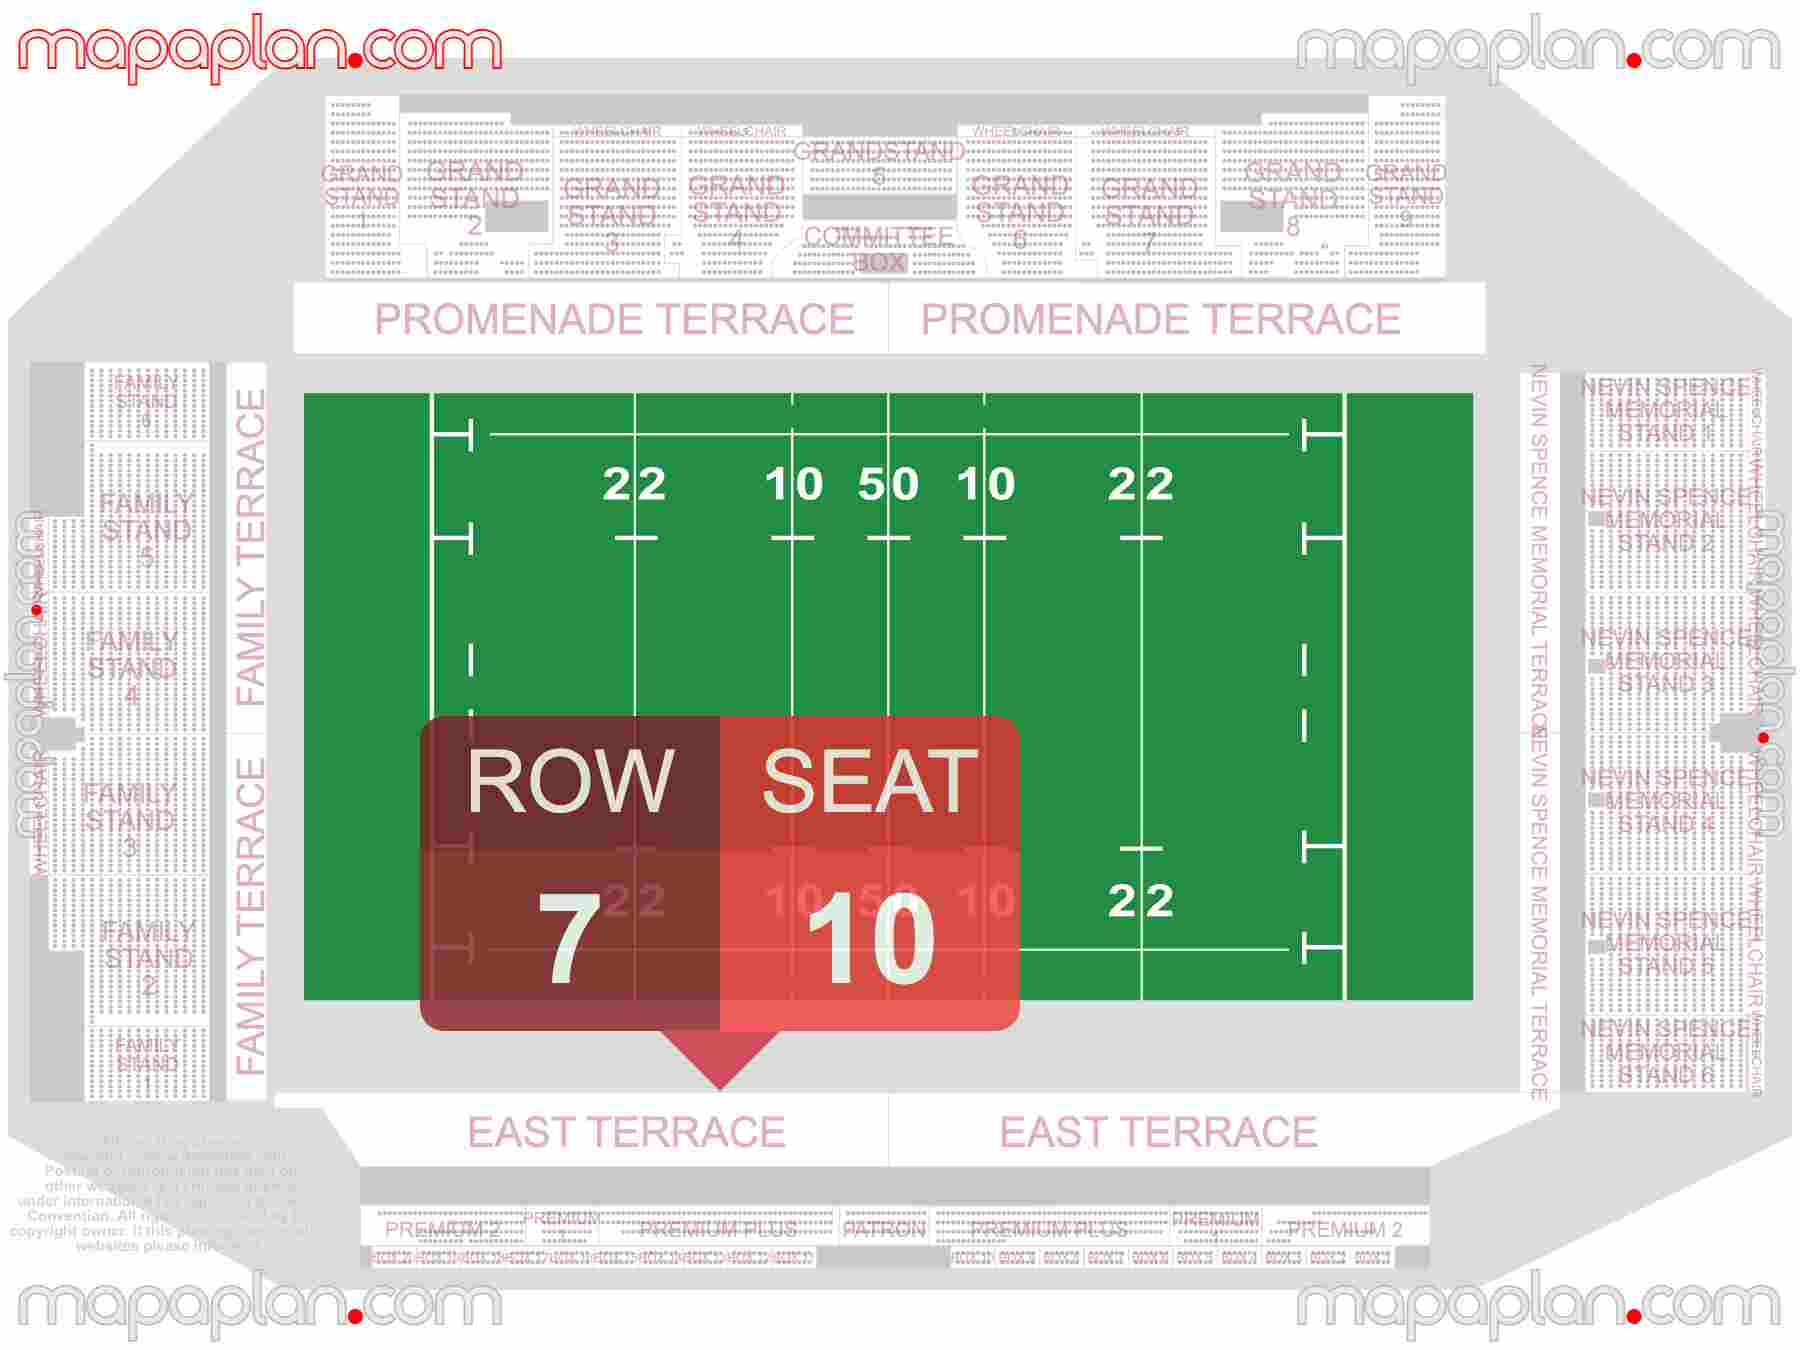 Belfast Ravenhill Uster Rugby Kingspan Stadium seating plan Rugby detailed seat numbers and row numbering plan with interactive map map layout